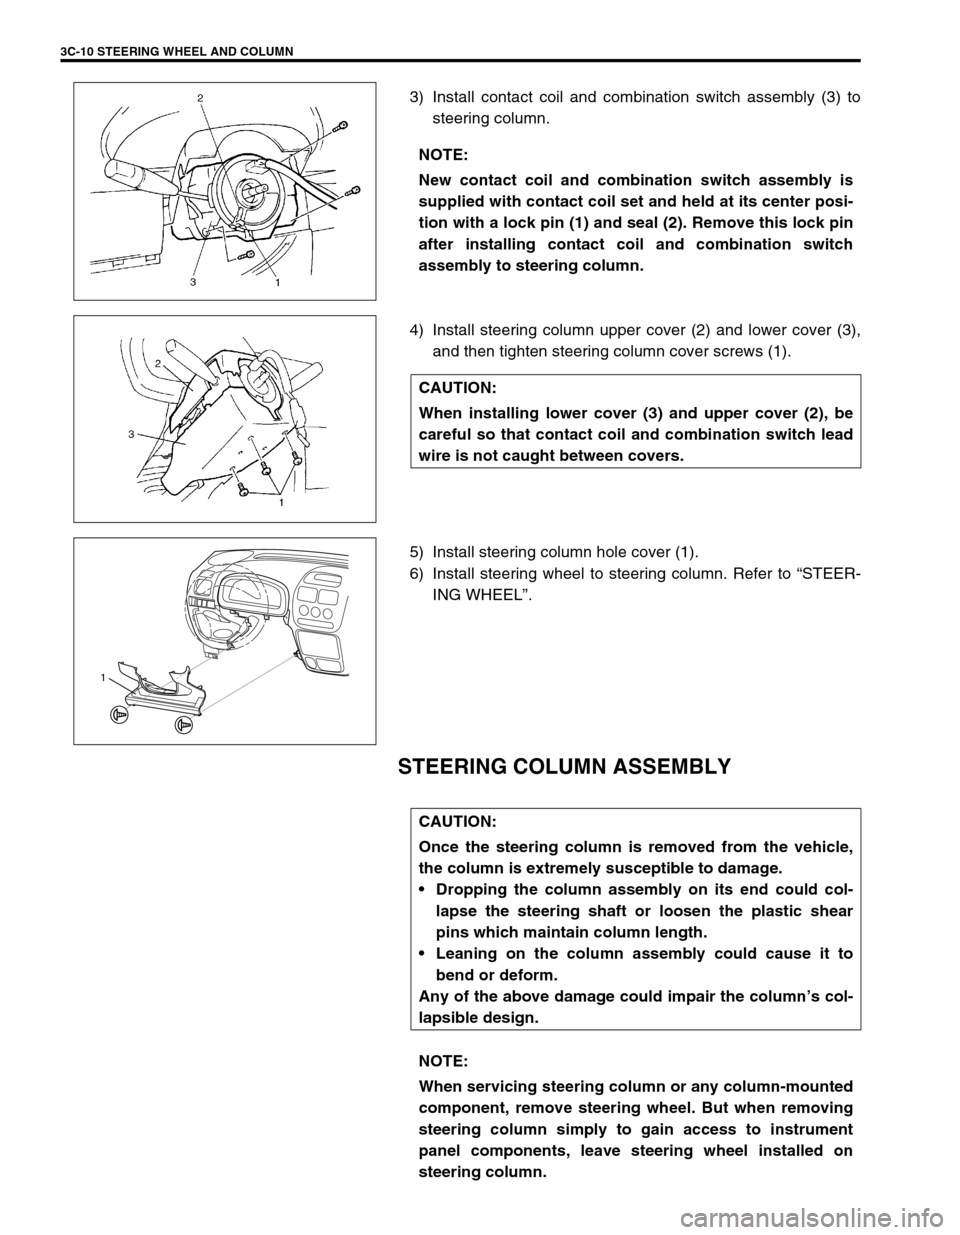 SUZUKI SWIFT 2000 1.G RG413 Service Workshop Manual 3C-10 STEERING WHEEL AND COLUMN
3) Install contact coil and combination switch assembly (3) to
steering column.
4) Install steering column upper cover (2) and lower cover (3),
and then tighten steerin